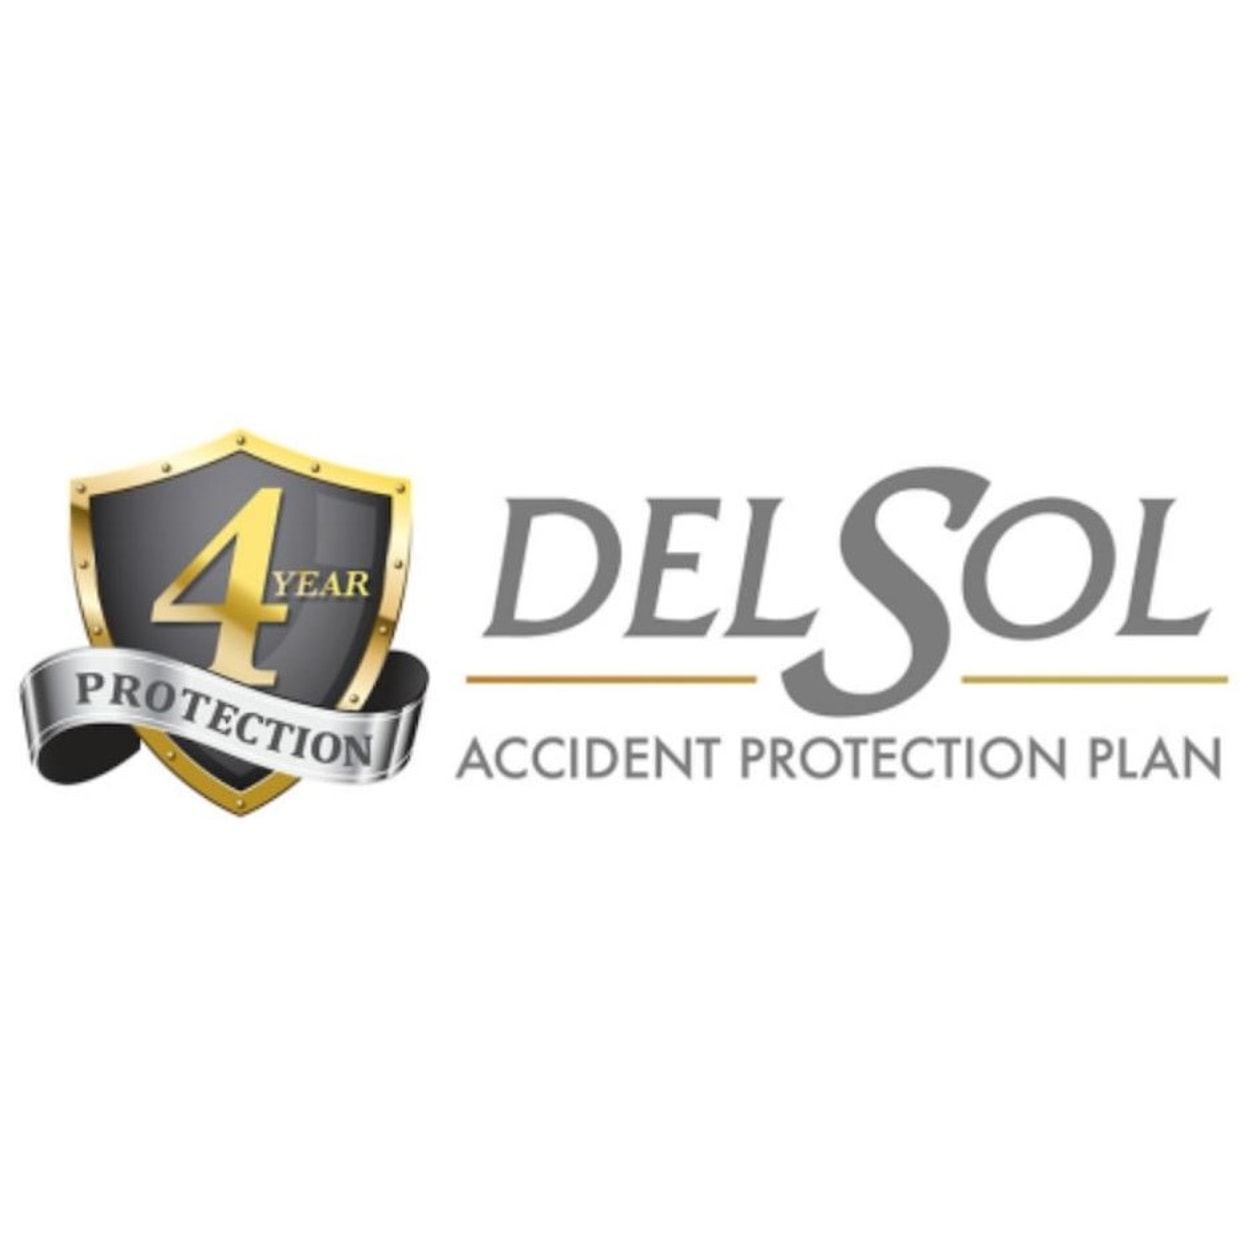 DS Del Sol Protection Plan 4YR Protection Plan - $3,001 to $3,500